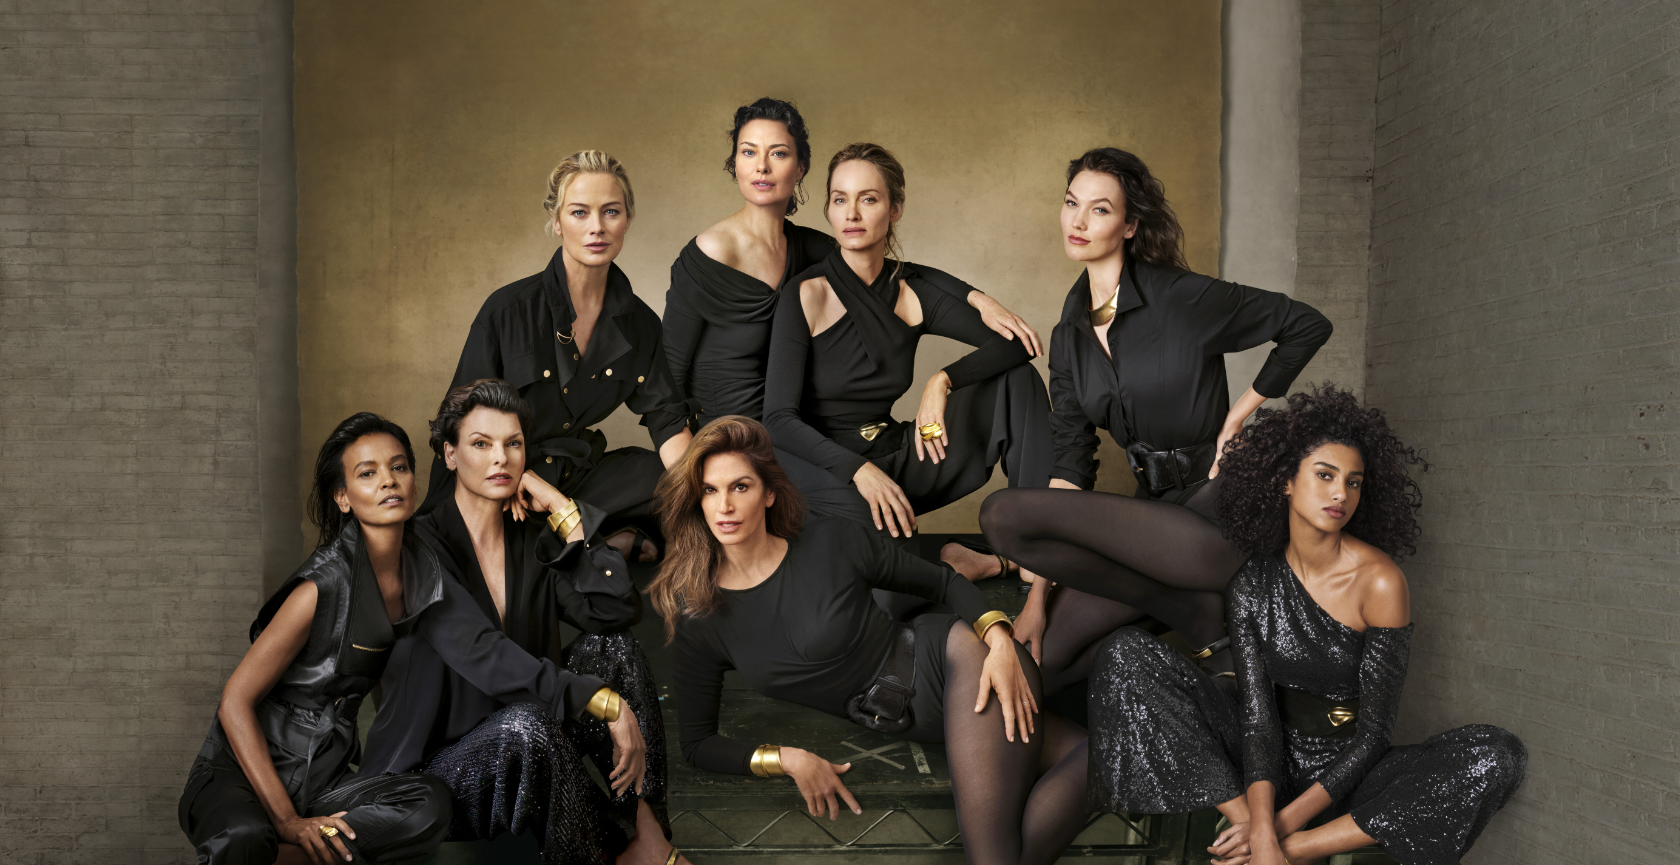 Trey Laird Takes Us Behind the Scenes of the Donna Karan Relaunch